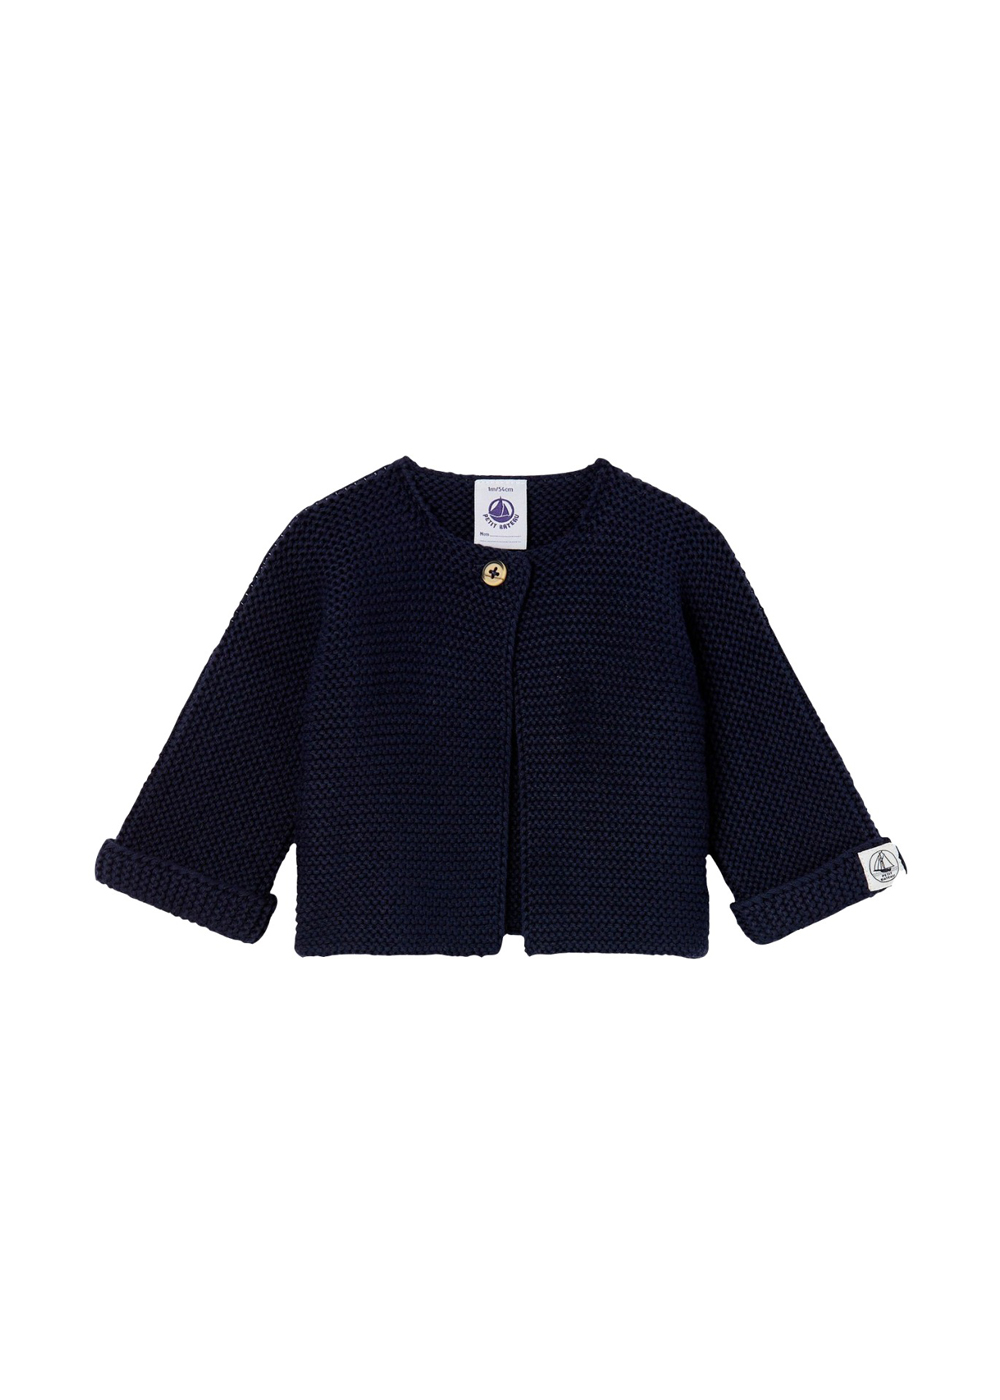 Featured image for “PETIT BATEAU CARDIGAN IN TRICOT”